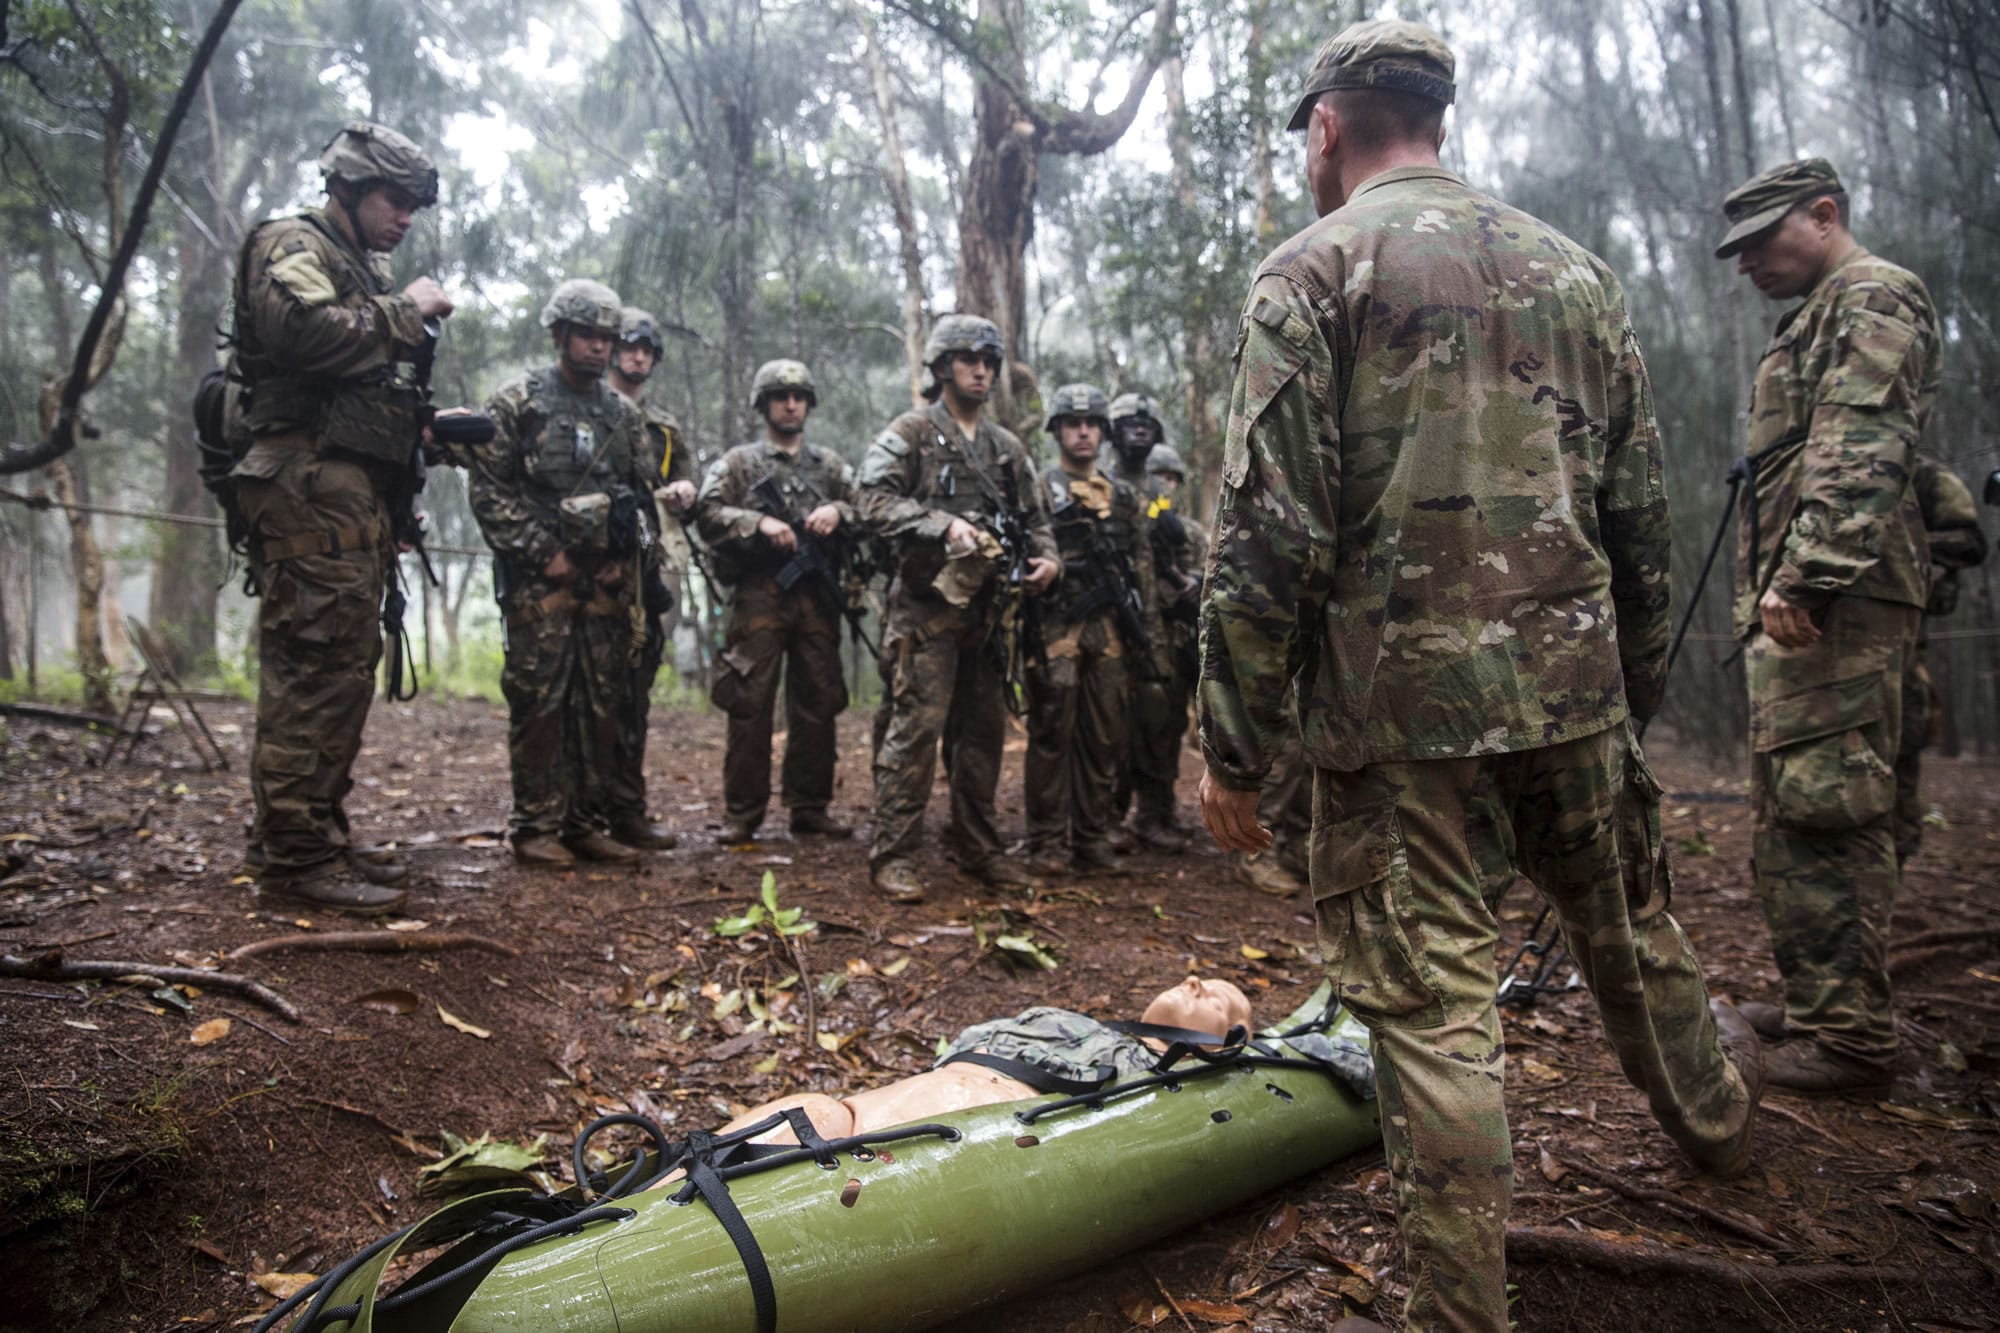 In this March 1, 2017, photo, soldiers from the U.S. Army's 25th Infantry Division 1st Stryker Brigade Combat Team participate in jungle warfare training at Schofield Barracks, Hawaii. The Army has set up a jungle training course amid a renewed focus on Asia and the Pacific after more than a decade of war in Iraq and Afghanistan.